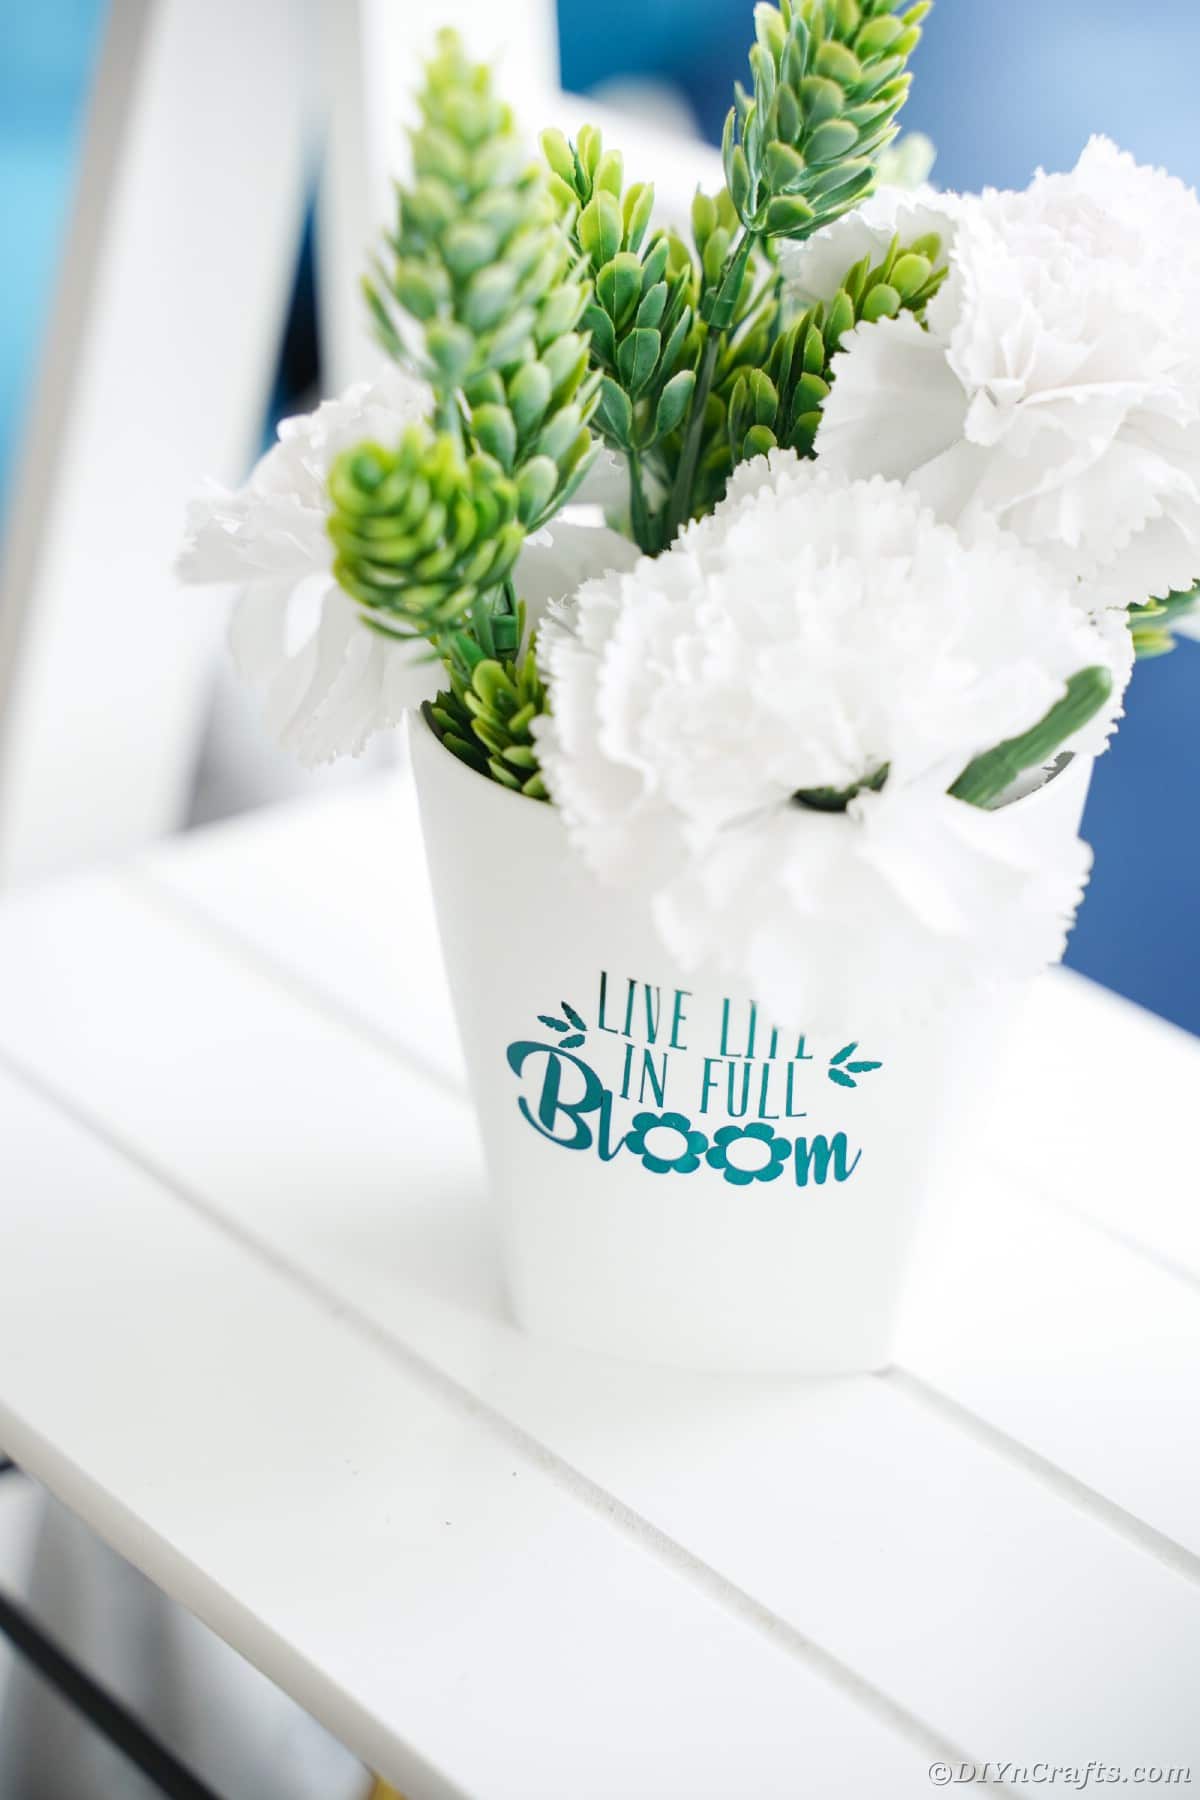 White bucket on shelf with teal lettering